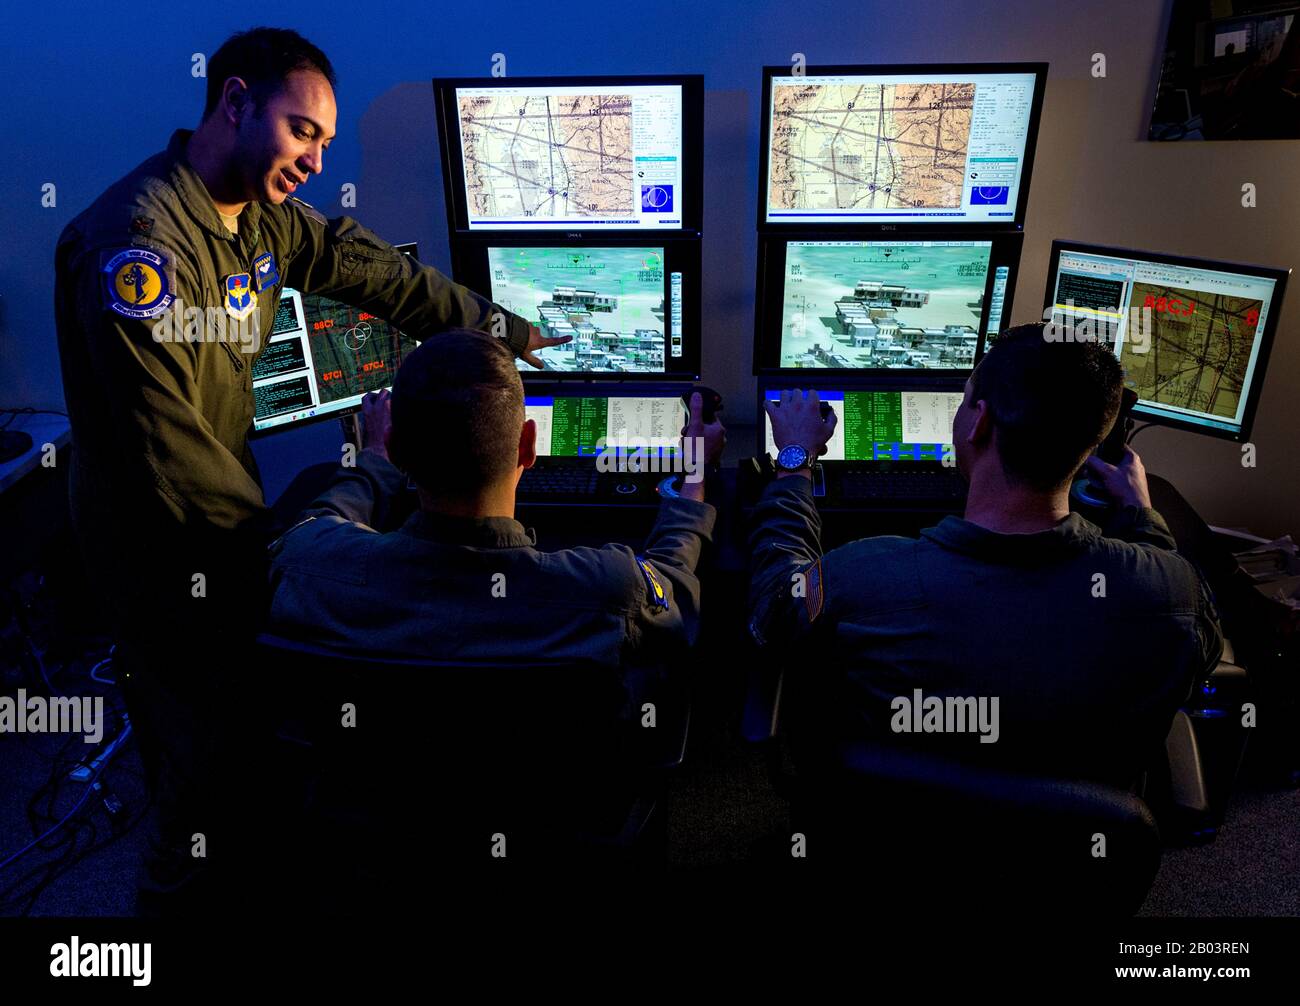 A U.S. Air Force Instructor Pilot, left, with student pilots during a Predator Reaper drone mission flight simulator at the 558th Flying Training Squadron, Joint Base San Antonio July 17, 2018 in San Antonio, Texas. Student pilots spend 85 days in the RPA Instrument Qualification course and 30 days in the RPA Fundamentals Course during the second phase of the Air Education and Training Command pilot curriculum. Stock Photo